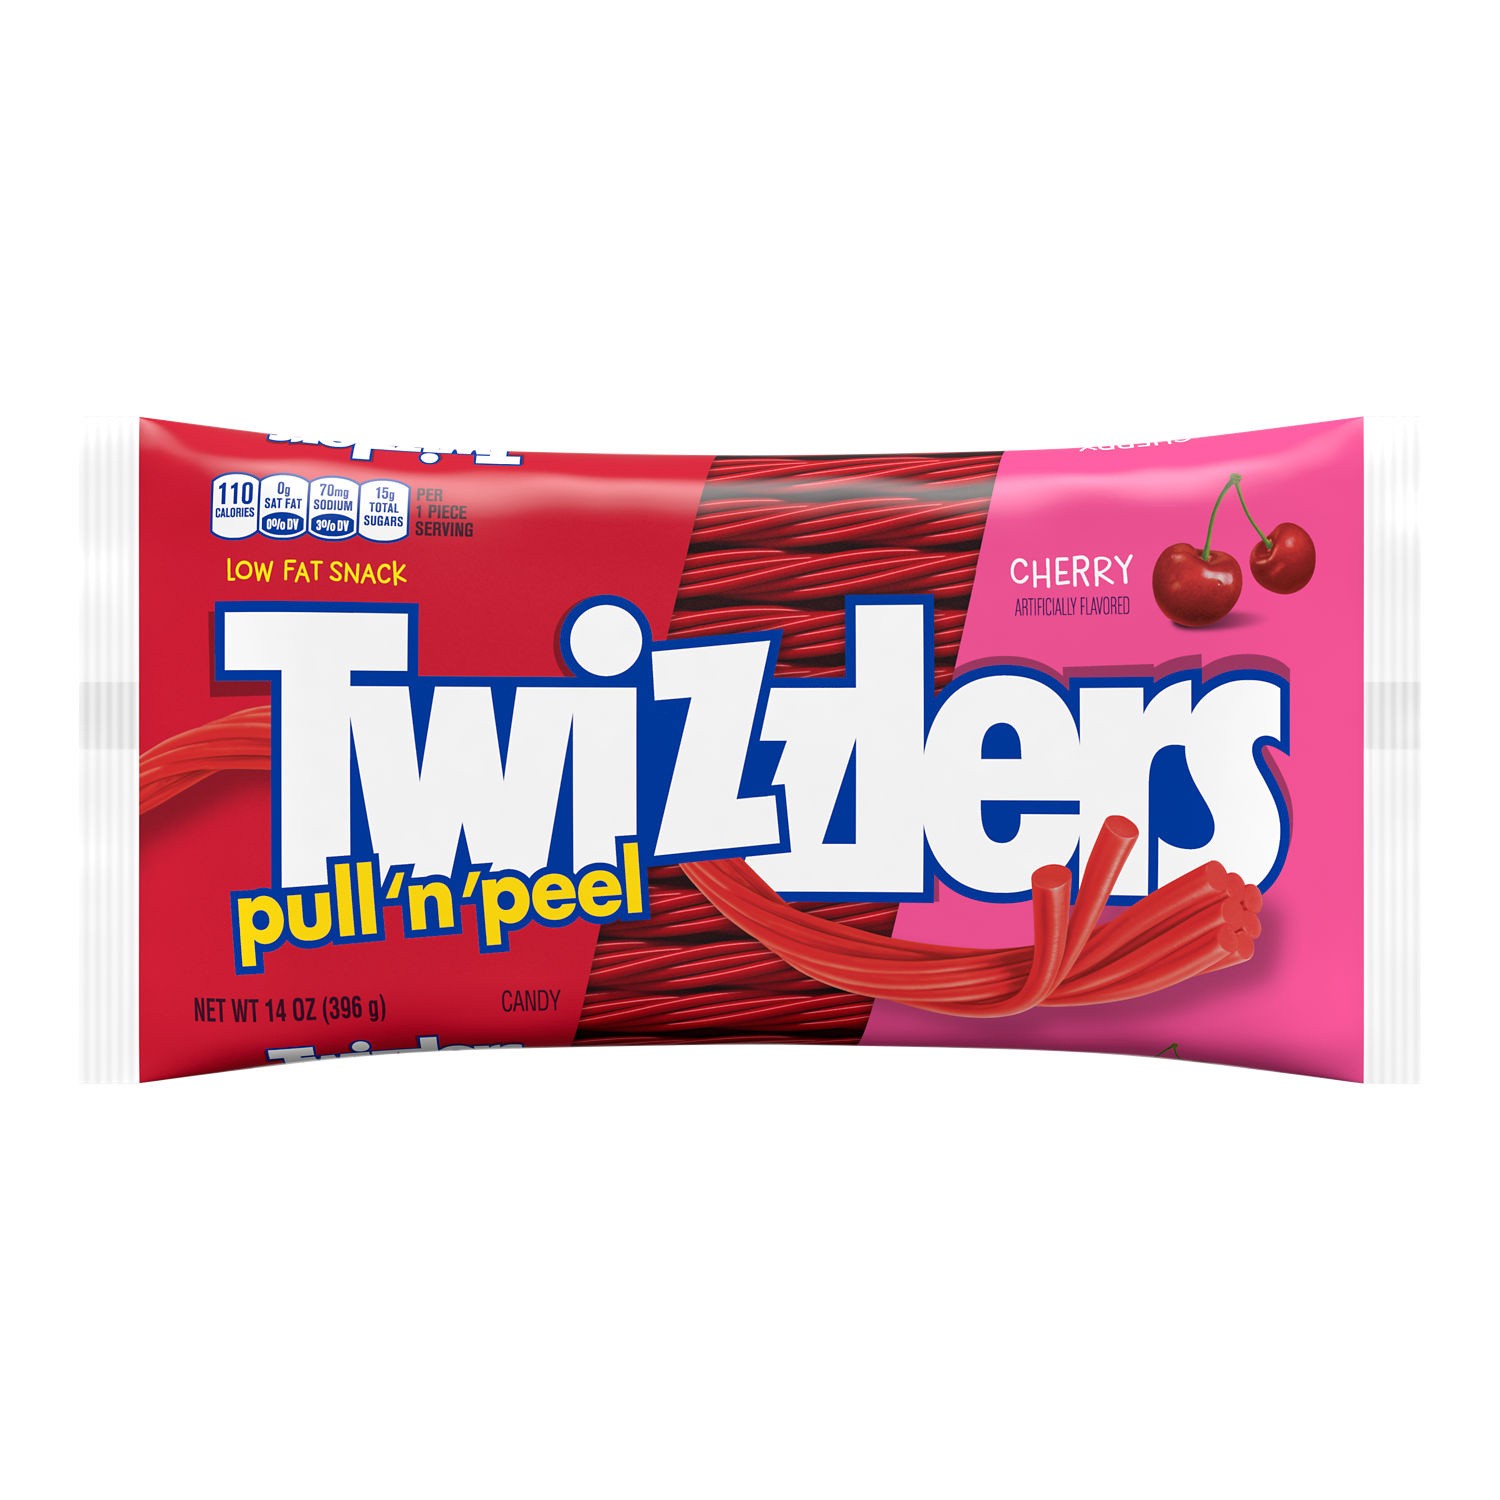 slide 1 of 7, Twizzlers PULL 'N' PEEL Cherry Flavored Licorice Style, Low Fat Candy Bag, 14 oz, 14 oz